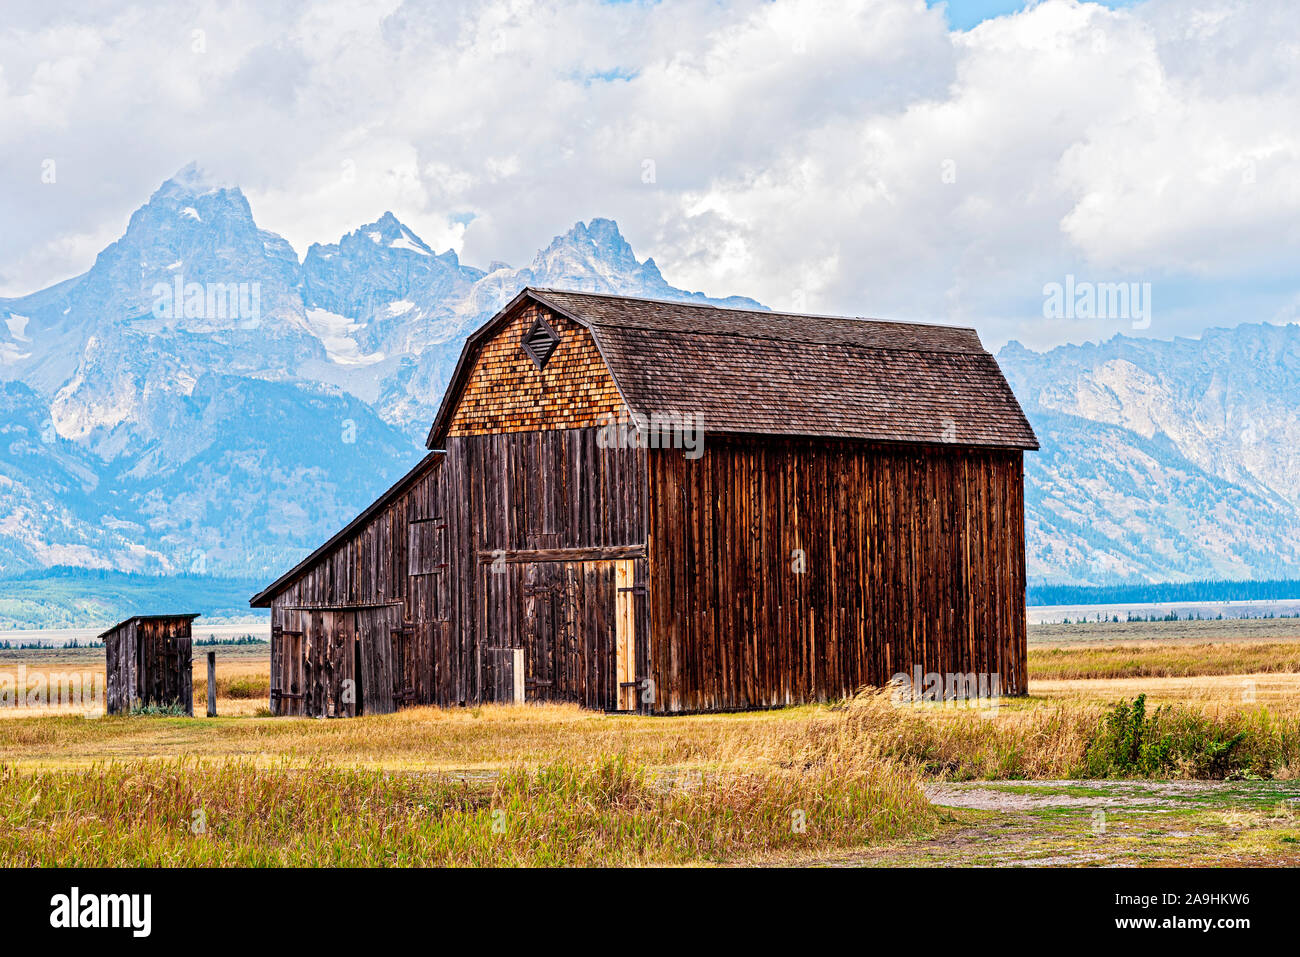 Old abandoned pioneer barn with outhouse behind, grass fields and Rocky Mountains beyond under cloudy skies. Stock Photo